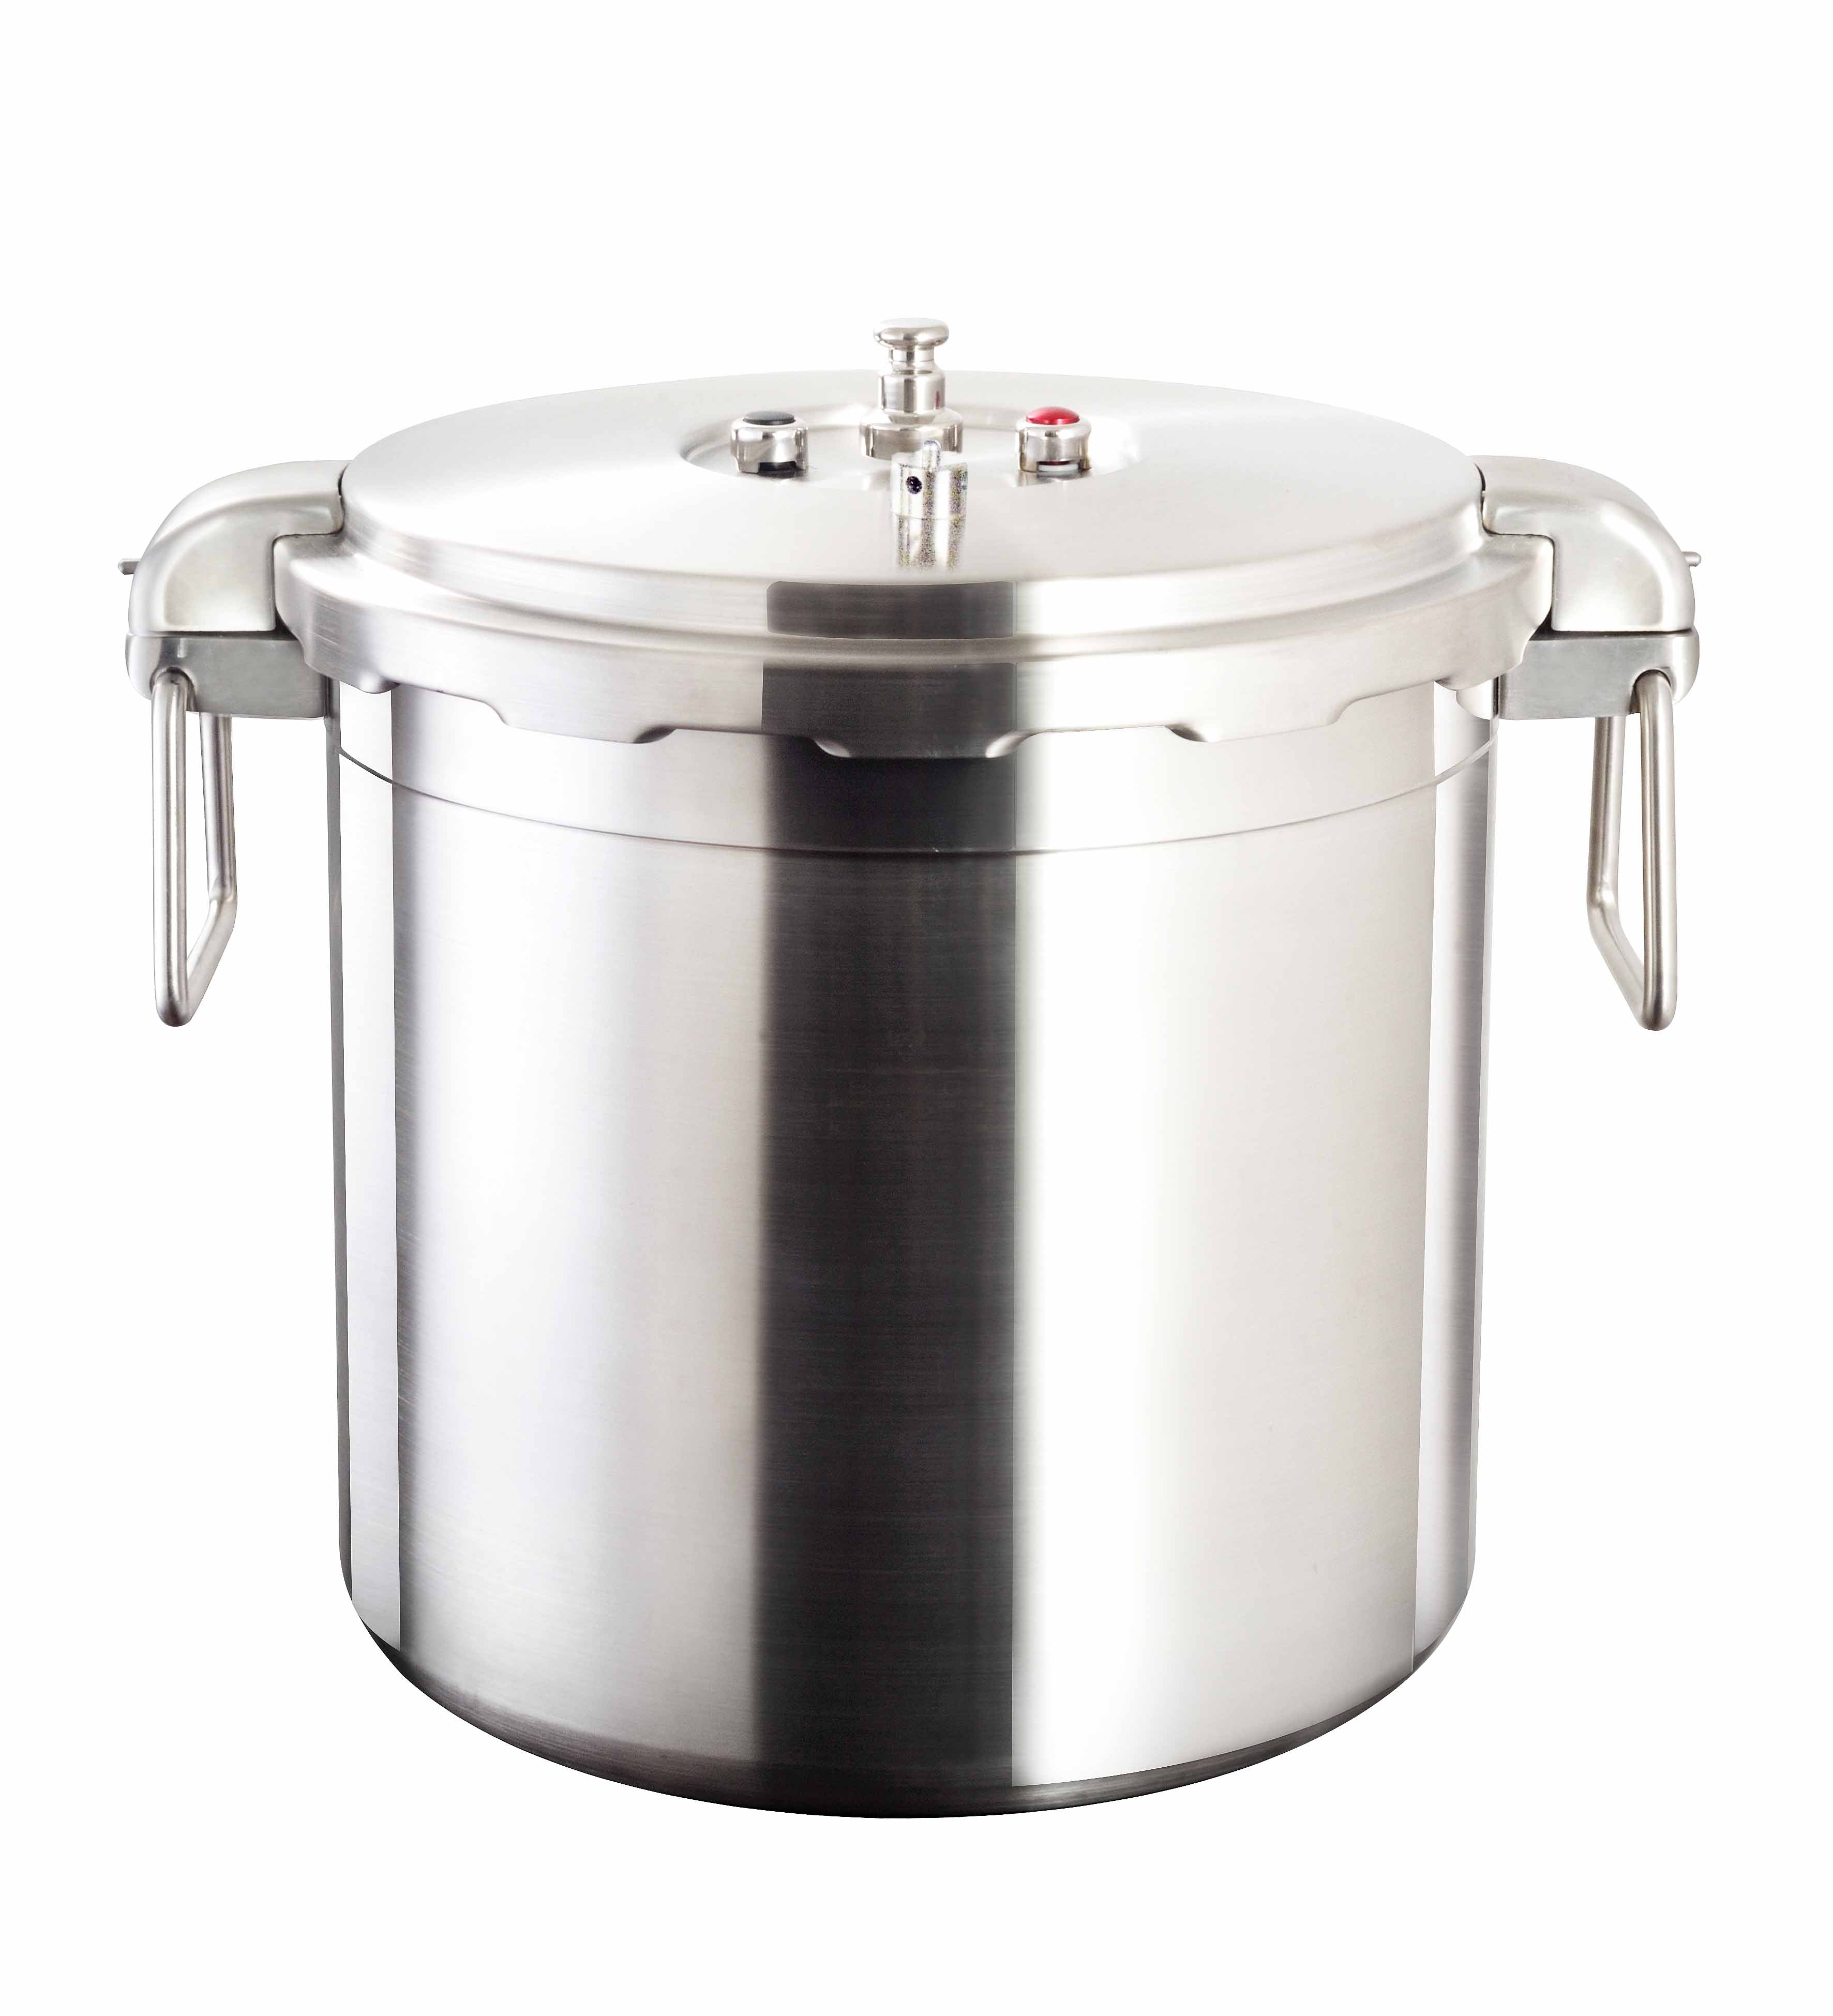 Buffalo Commercial Stainless Steel Pressure Cooker 30L